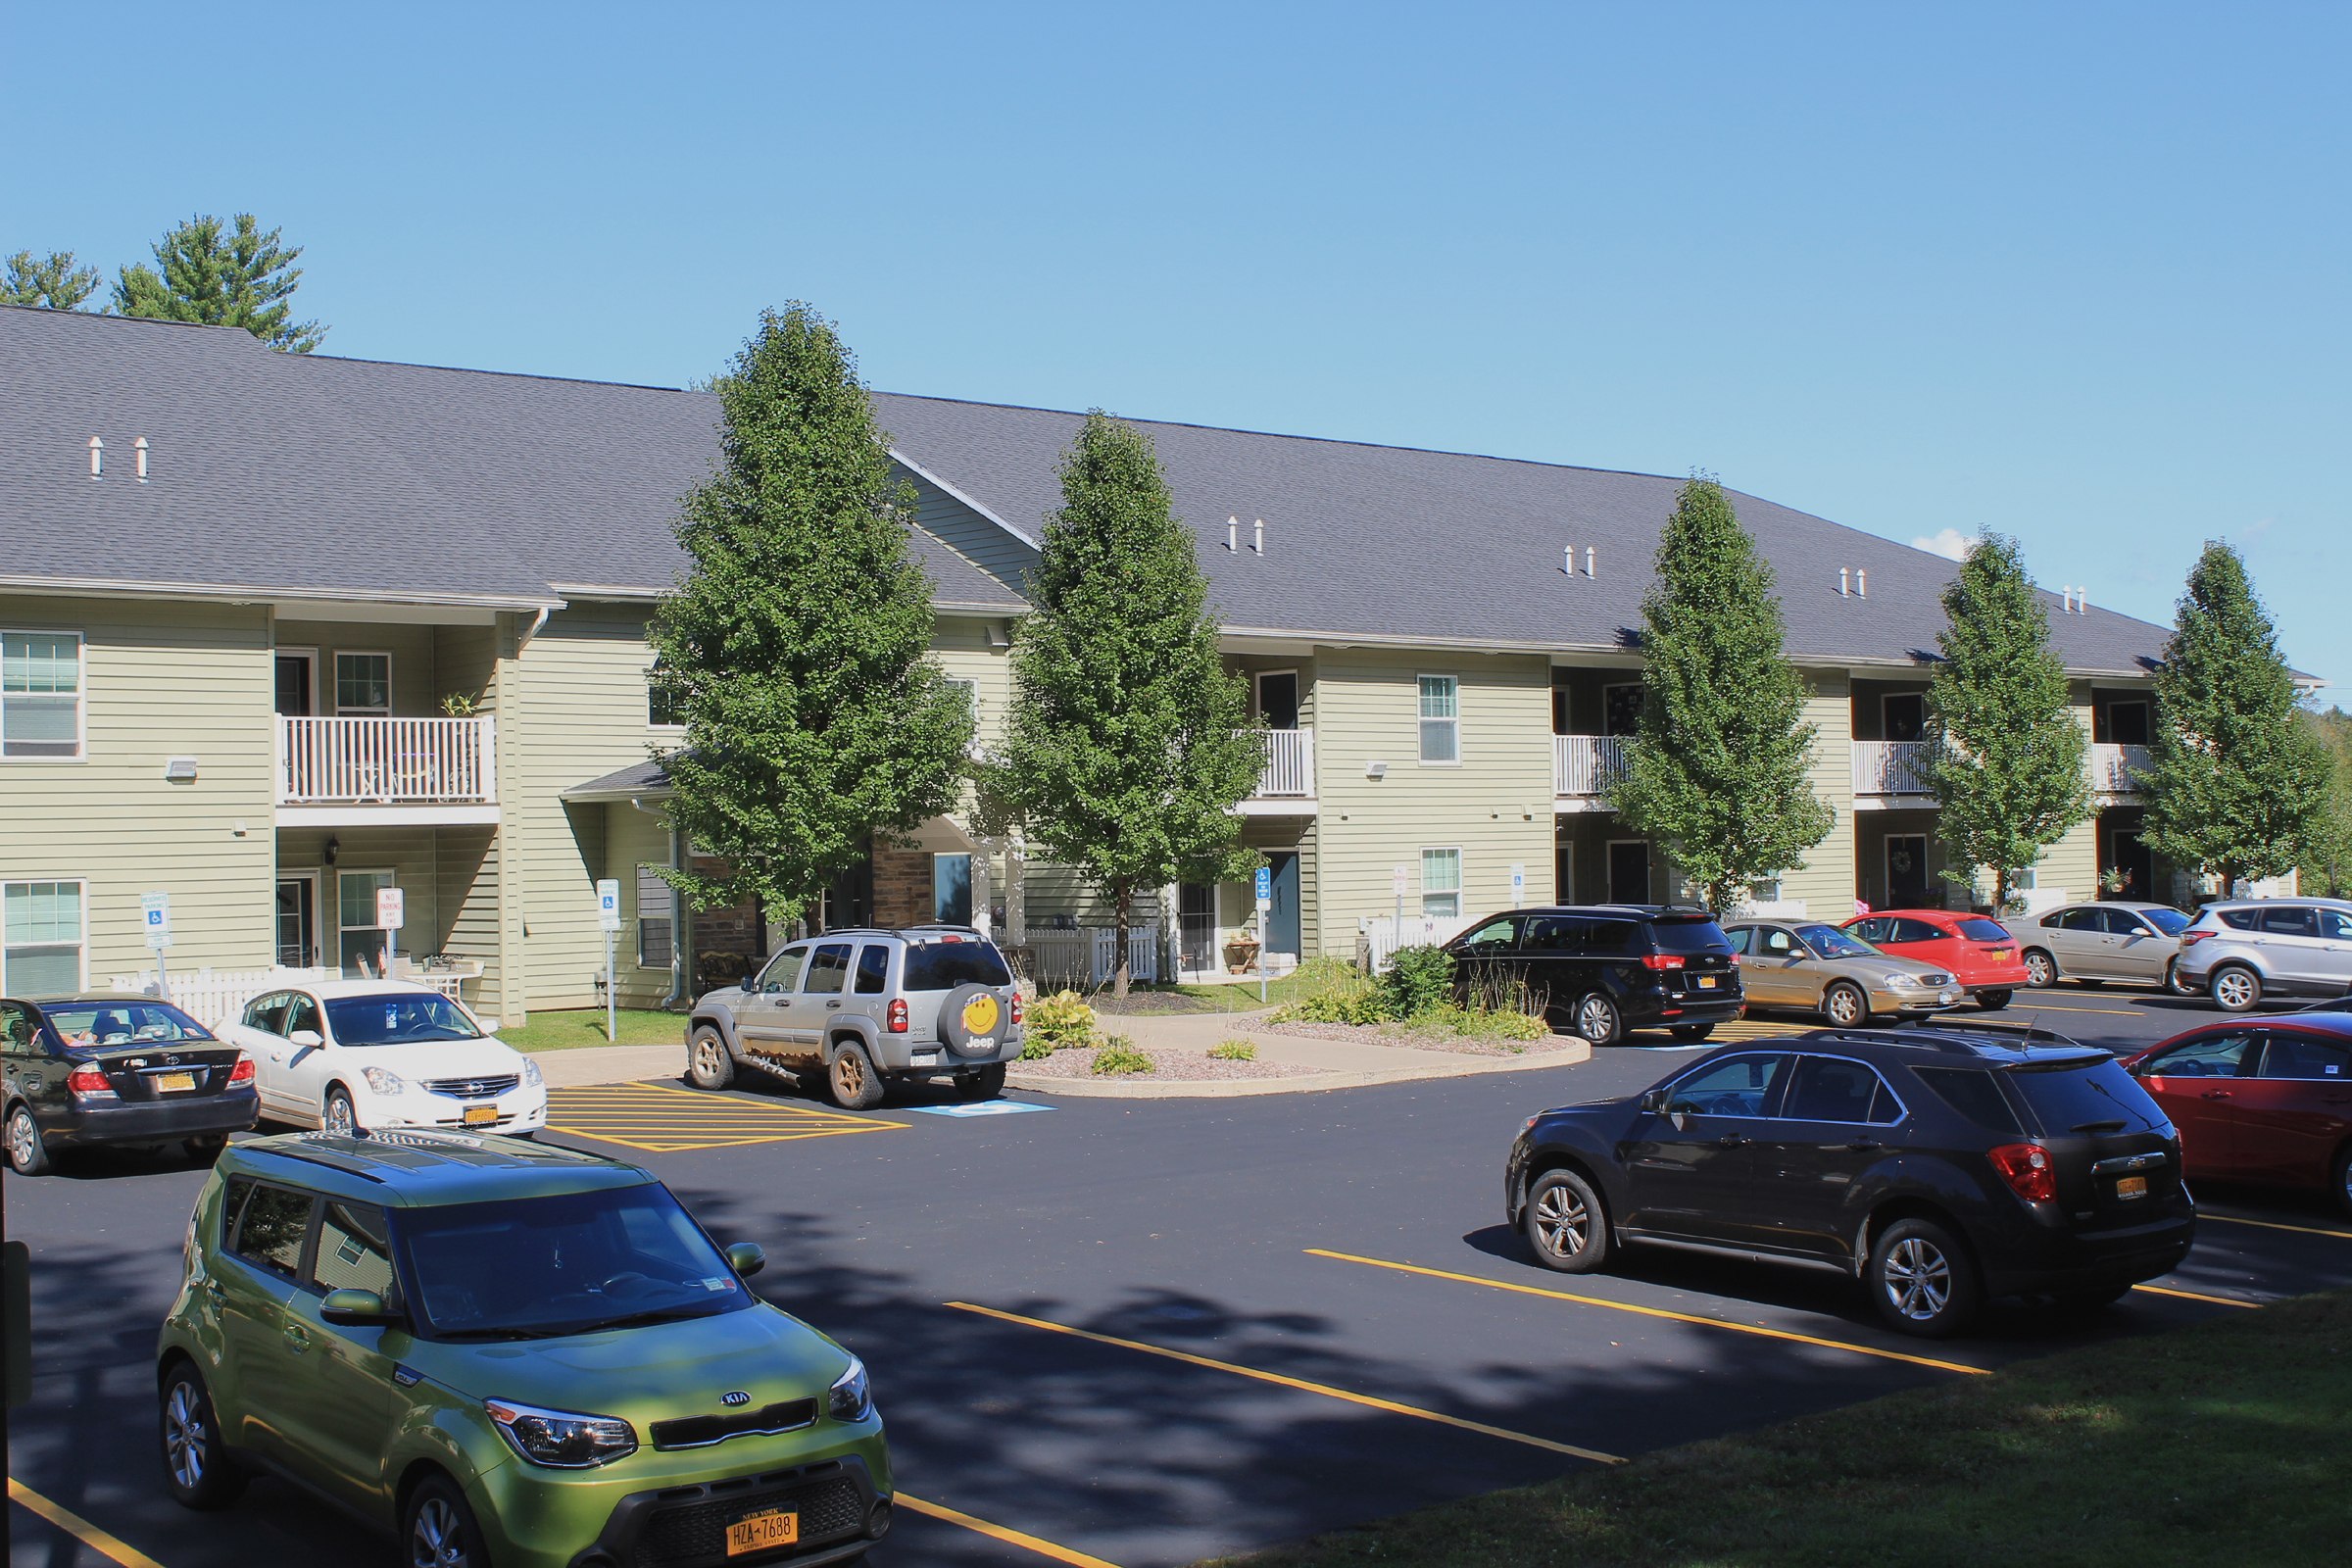 property management company client list syracuse ny street view image of waterworks landing apartments